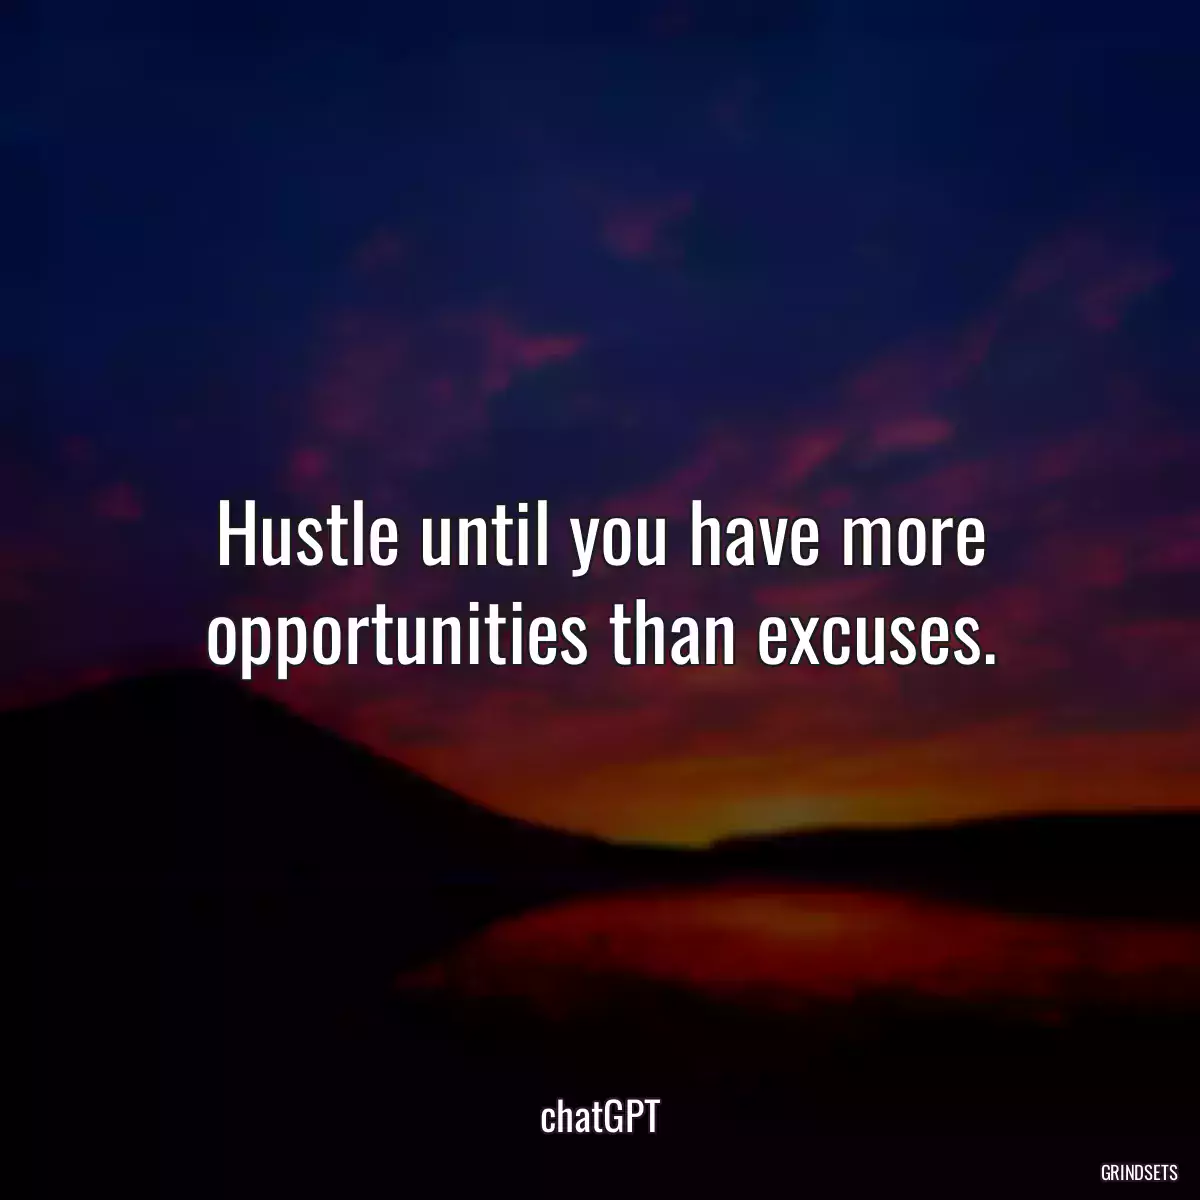 Hustle until you have more opportunities than excuses.